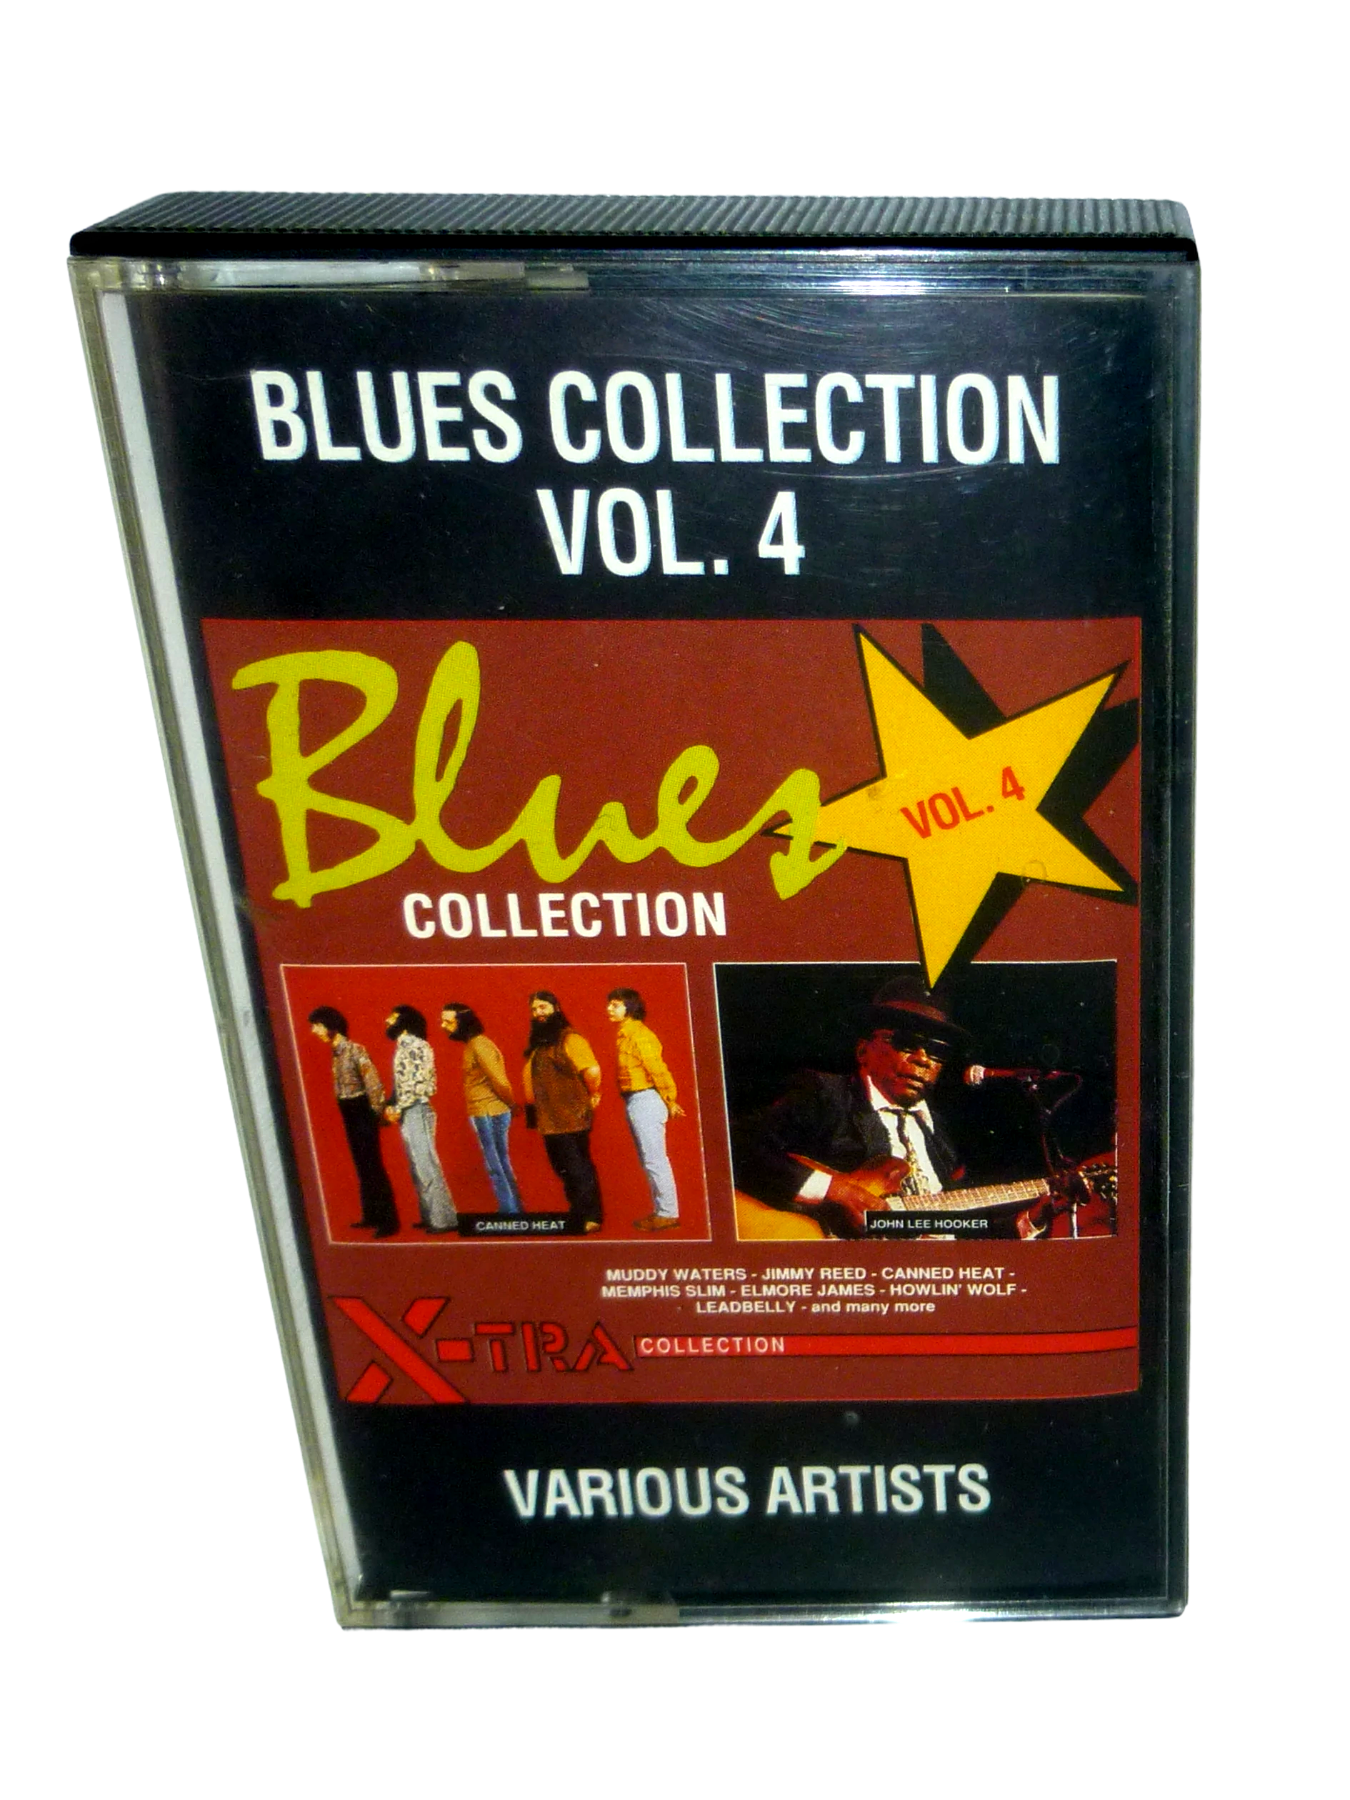 Blues Collection Vol. 4 - X-Tra Collection - Audio Cassette